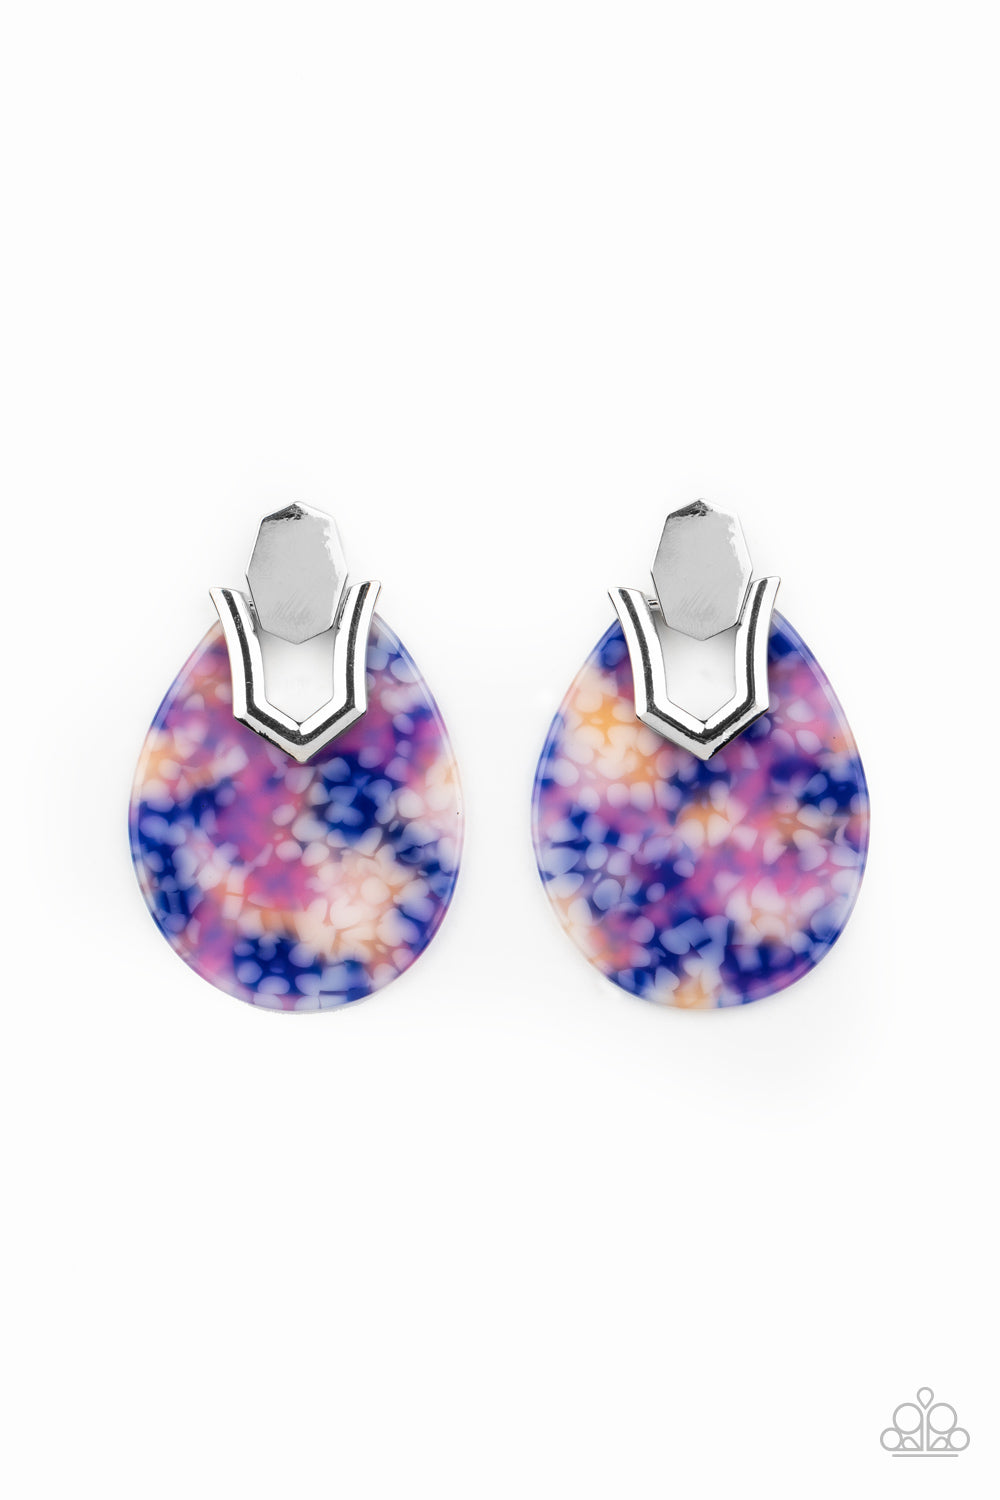 HAUTE Flash Blue Earring - Paparazzi Accessories Speckled in a colorful watercolor pattern, a teardrop acrylic frame fastens to a shiny silver fitting for a trendy retro look. Earring attaches to a standard post fitting.  ﻿All Paparazzi Accessories are lead free and nickel free!  Sold as one pair of post earrings.